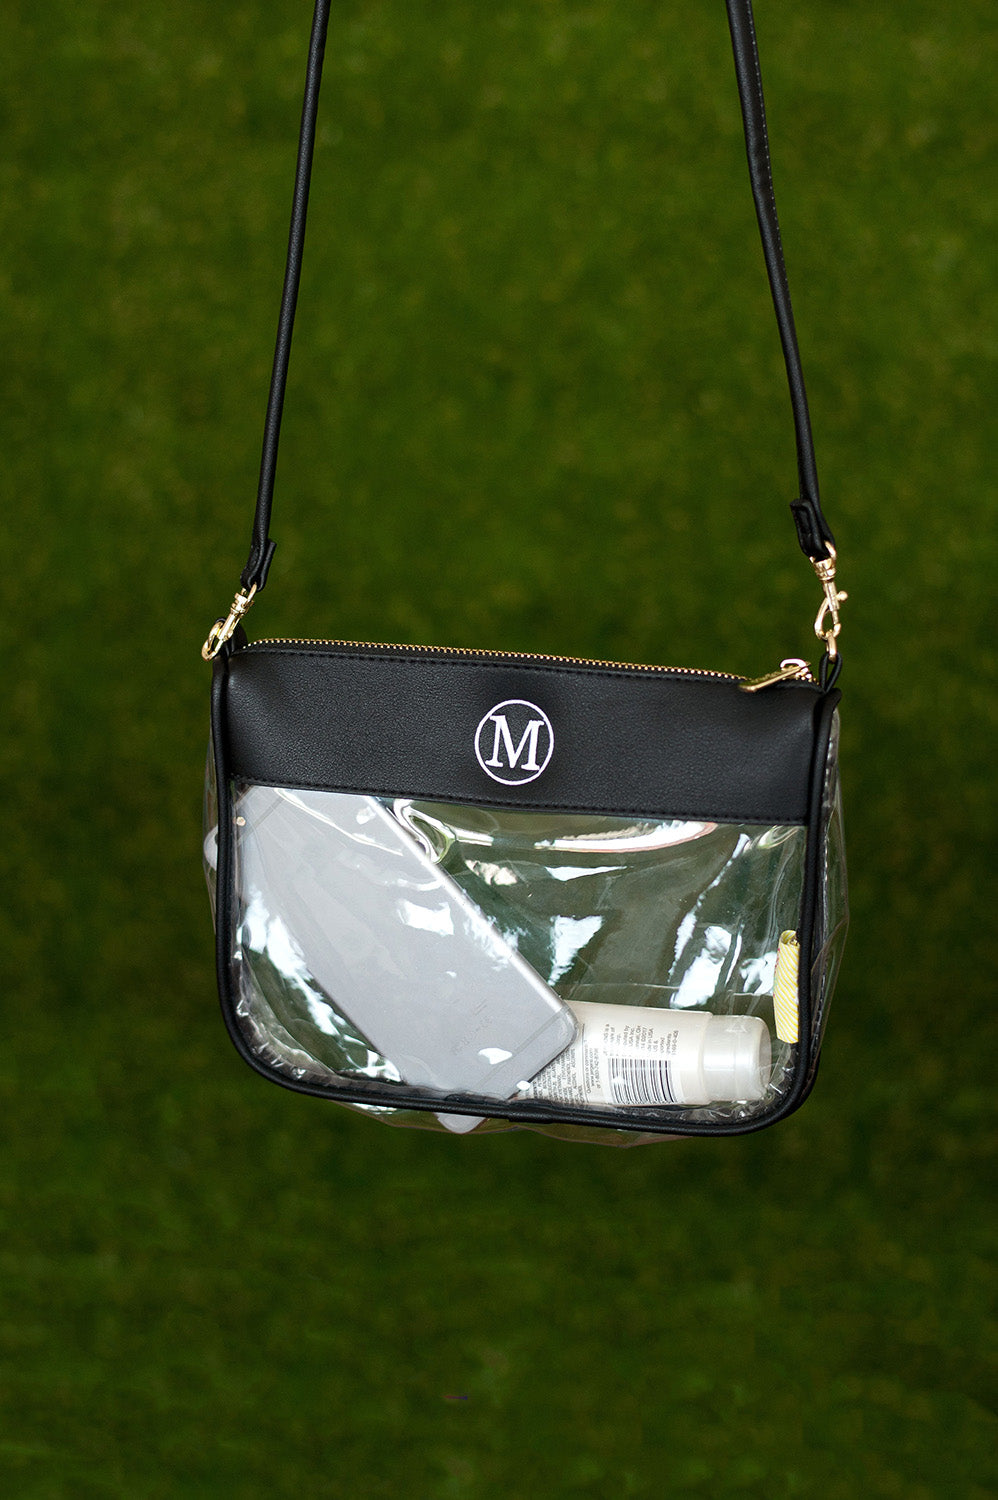 Stadium Approved Clear Crossbody Purse in Black with Monogram,Purses - Dirt Road Divas Boutique